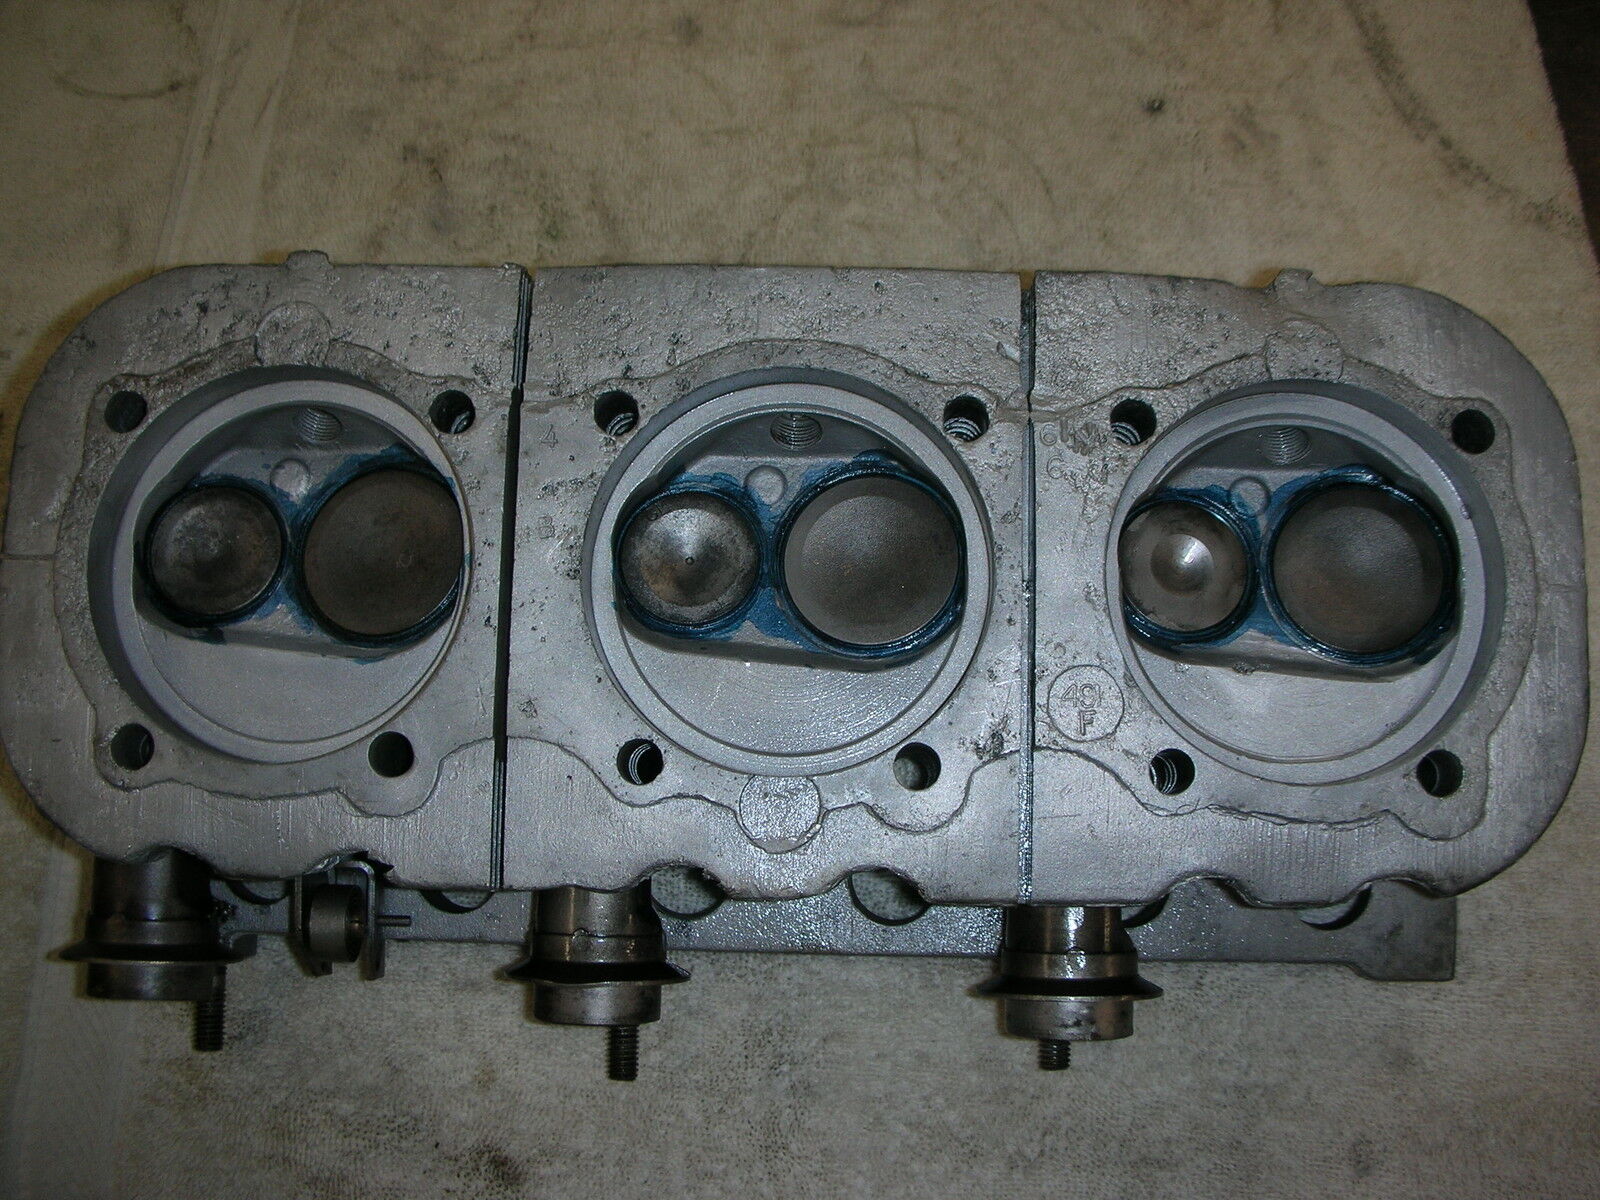 corvair 66 Head # 3878570 fresh valve job, stainless exhaust 3/8 bolts extra bos